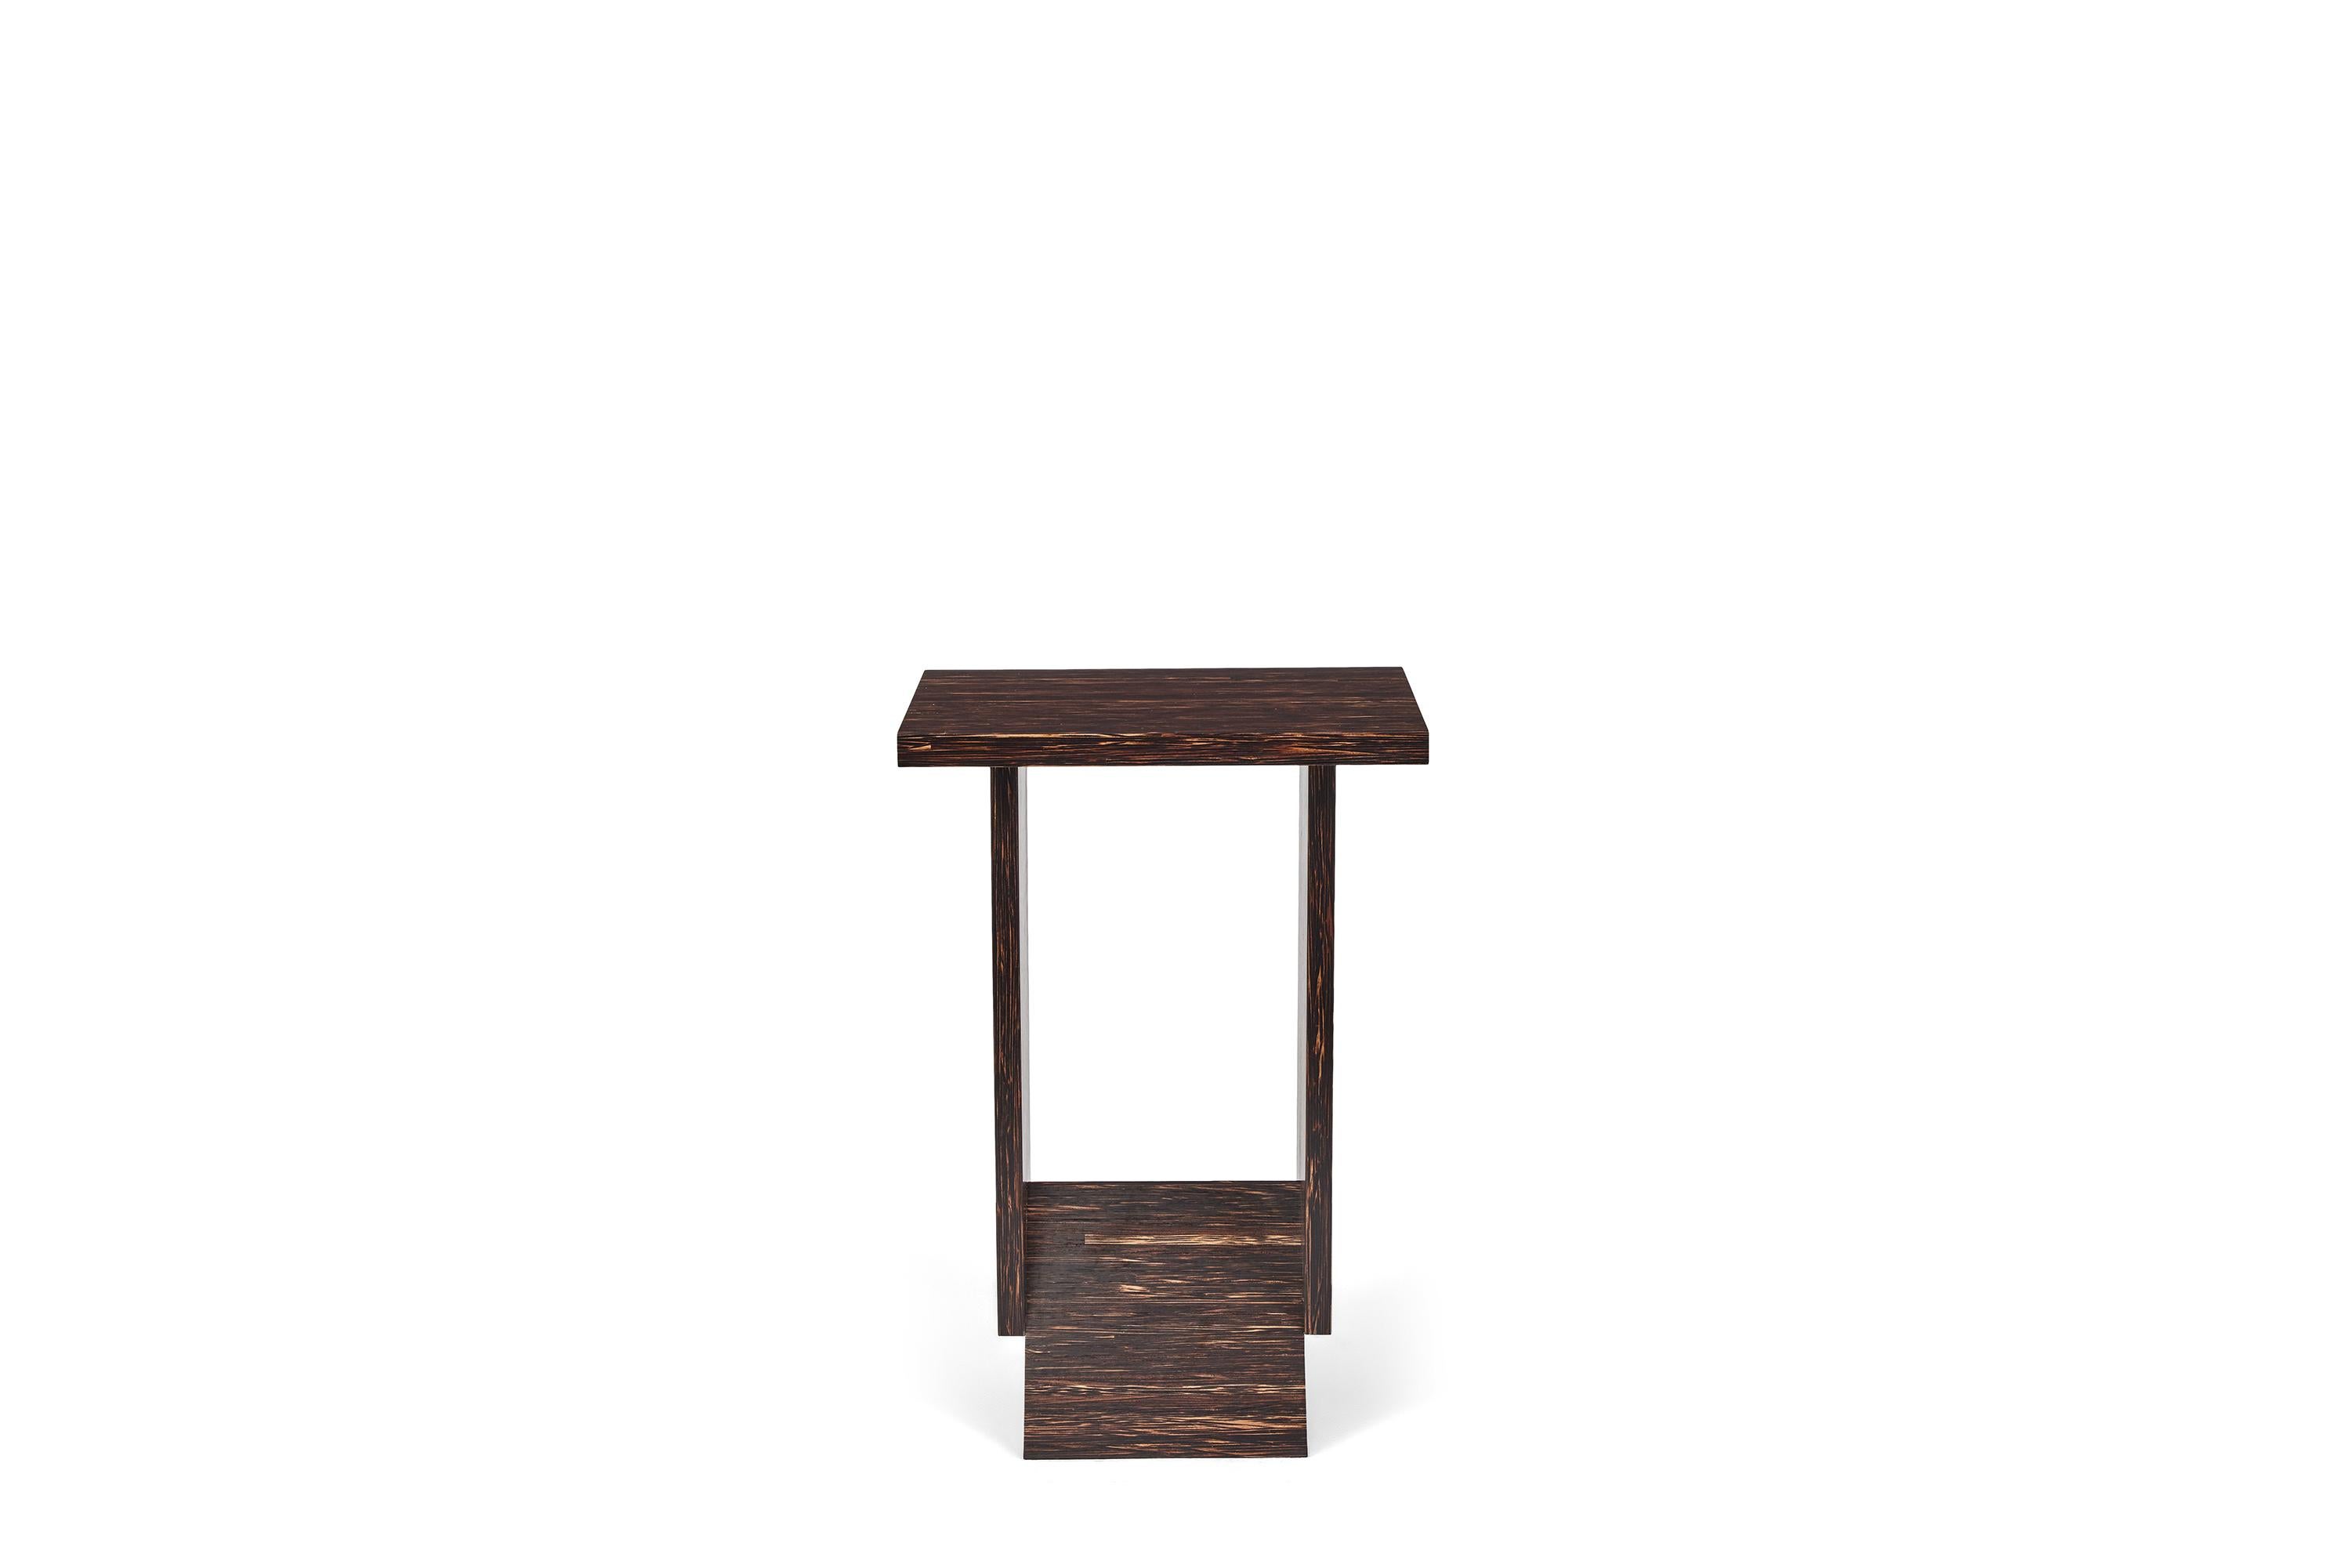 'Hotel de Tour' Palm Wood Side Table in the Manner of Pierre Chareau

Handcrafted in the Los Angeles and French workshops of noted French designer and antiques dealer Denis de le Mesiere, who meticulously pays homage to the work of Pierre Chareau